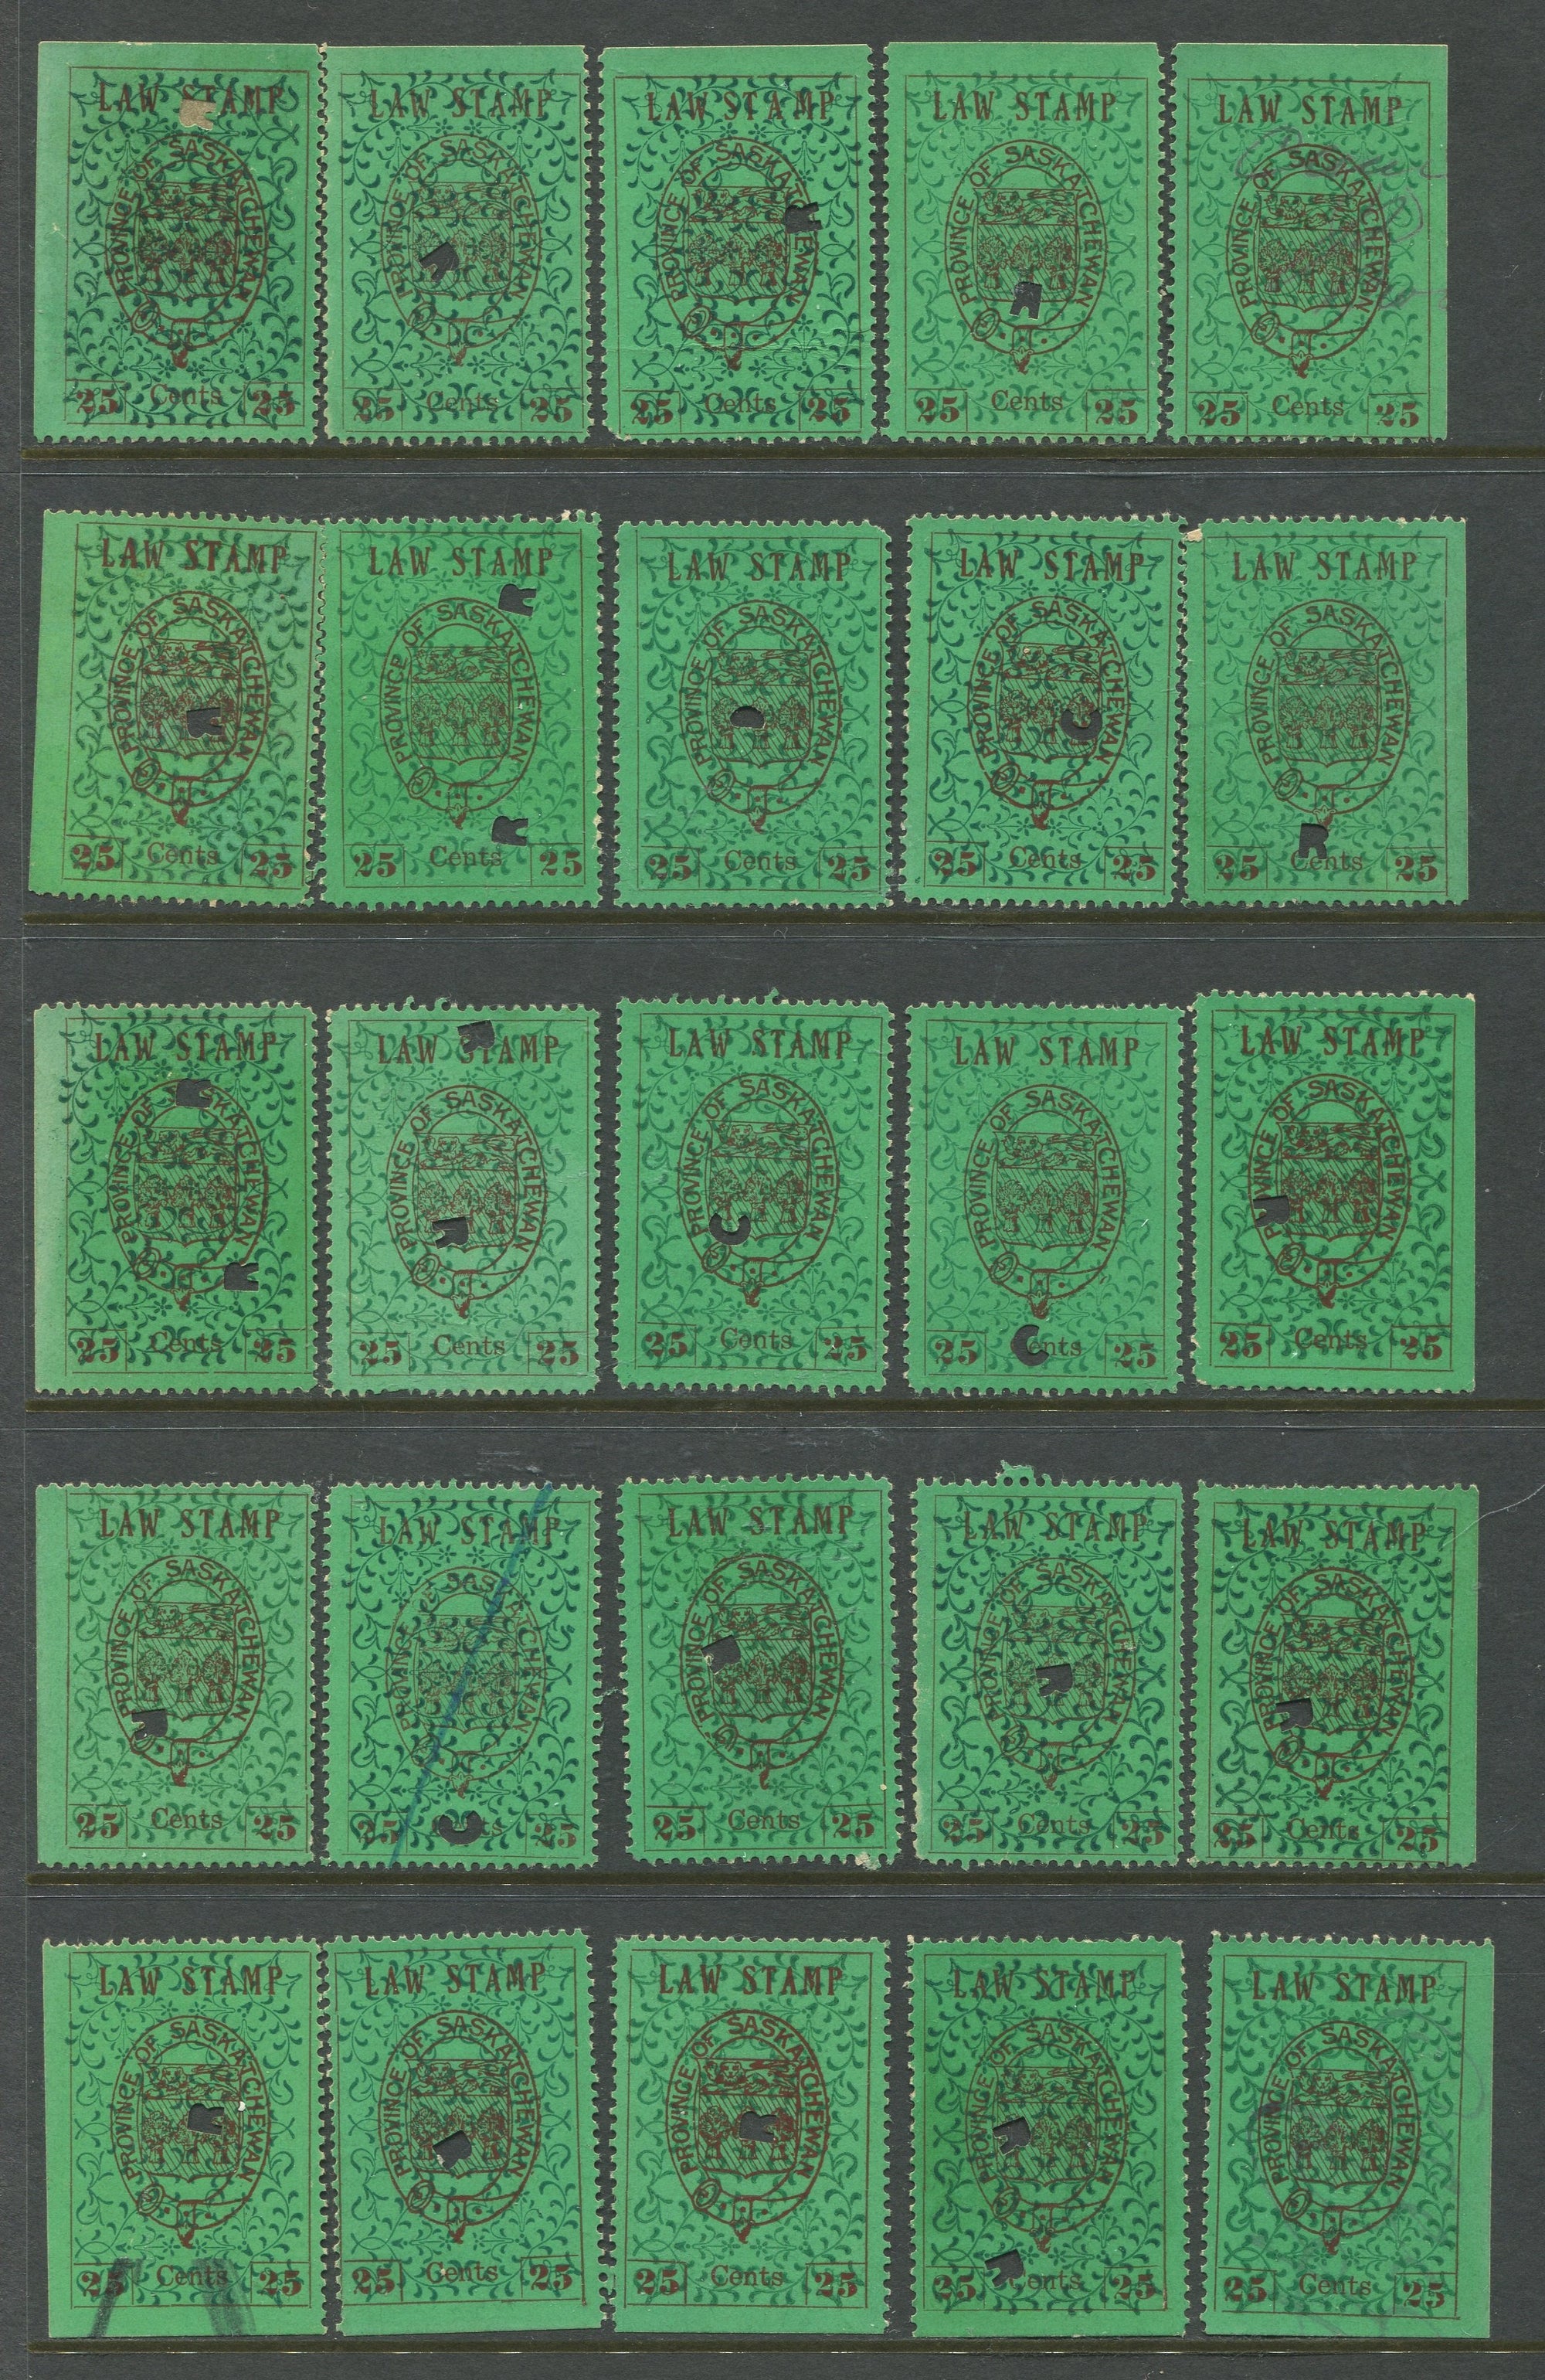 0004SL1709 - SL4 - Used Reconstructed Sheet - Deveney Stamps Ltd. Canadian Stamps